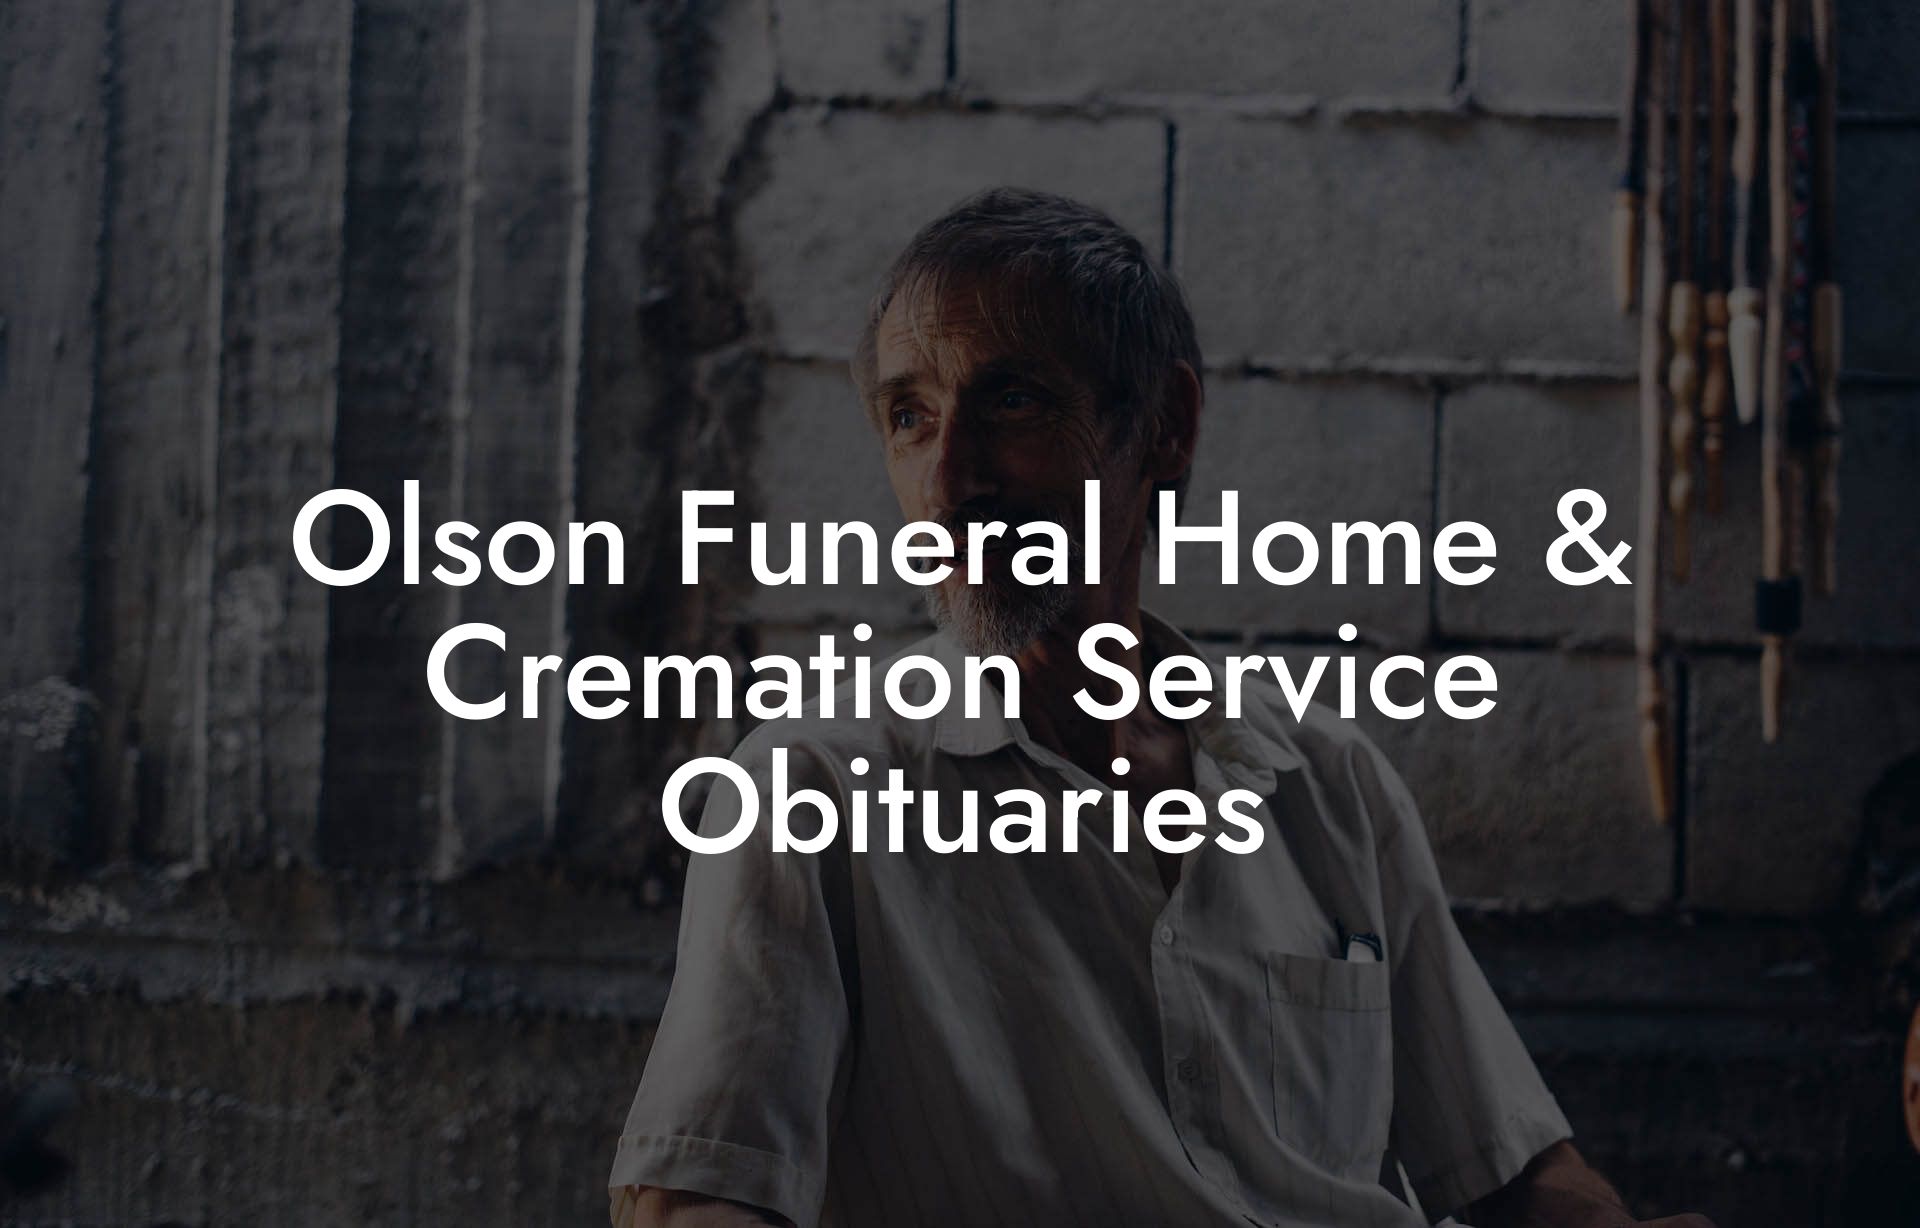 Olson Funeral Home & Cremation Service Obituaries